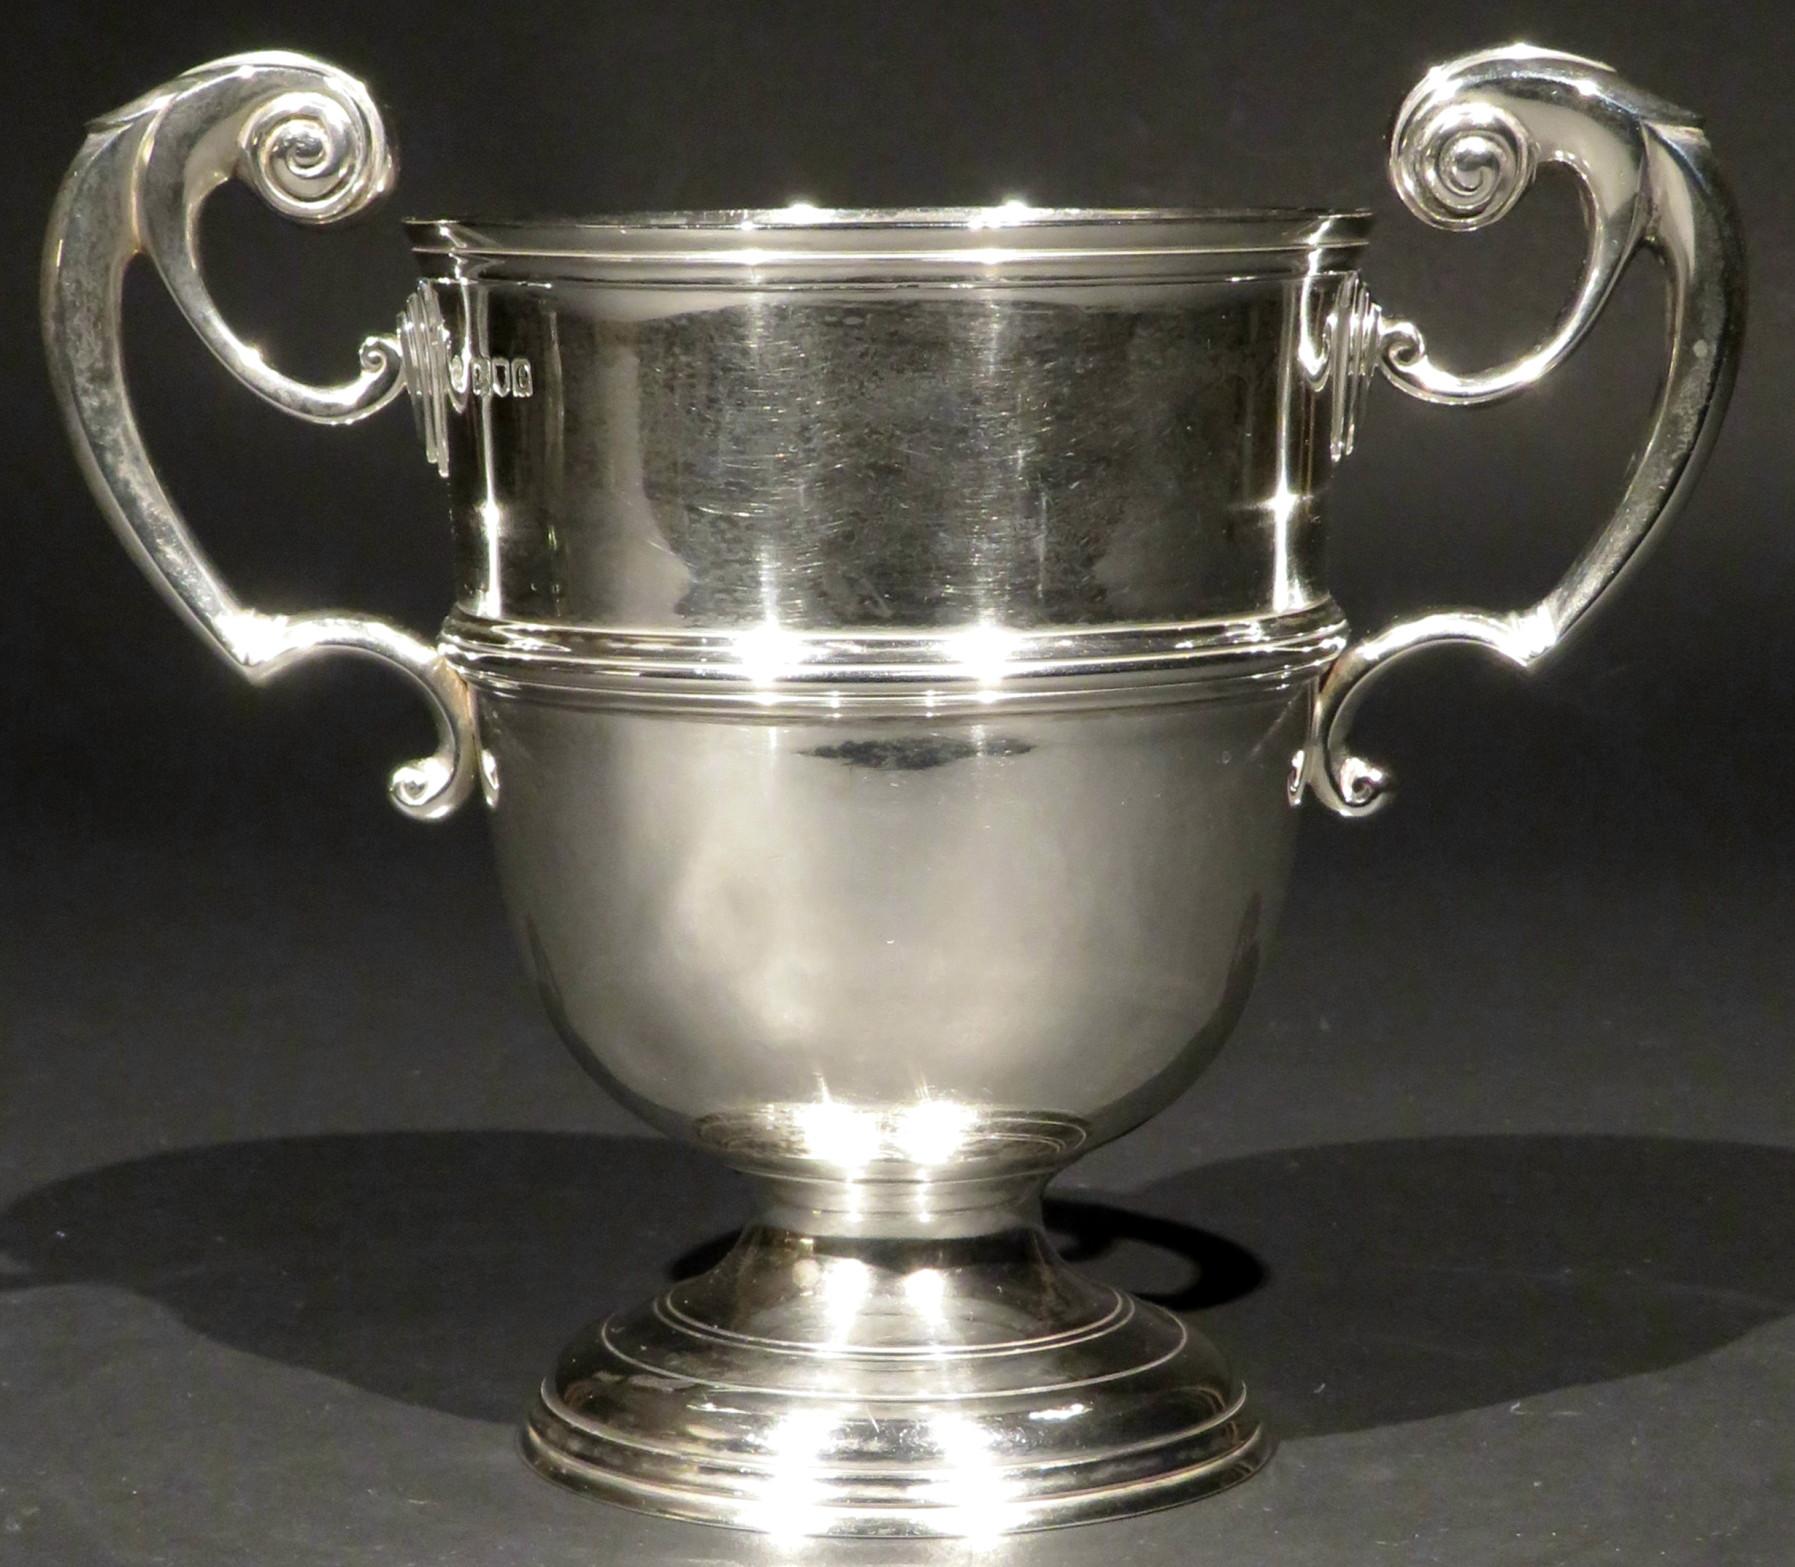 The Governor General's Prize is regarded as one of Canada's most important curling trophies, created by The Earl of Dufferin, Governor General of Canada from 1872–1878. Lord Dufferin was an enthusiastic supporter of curling and after his appointment